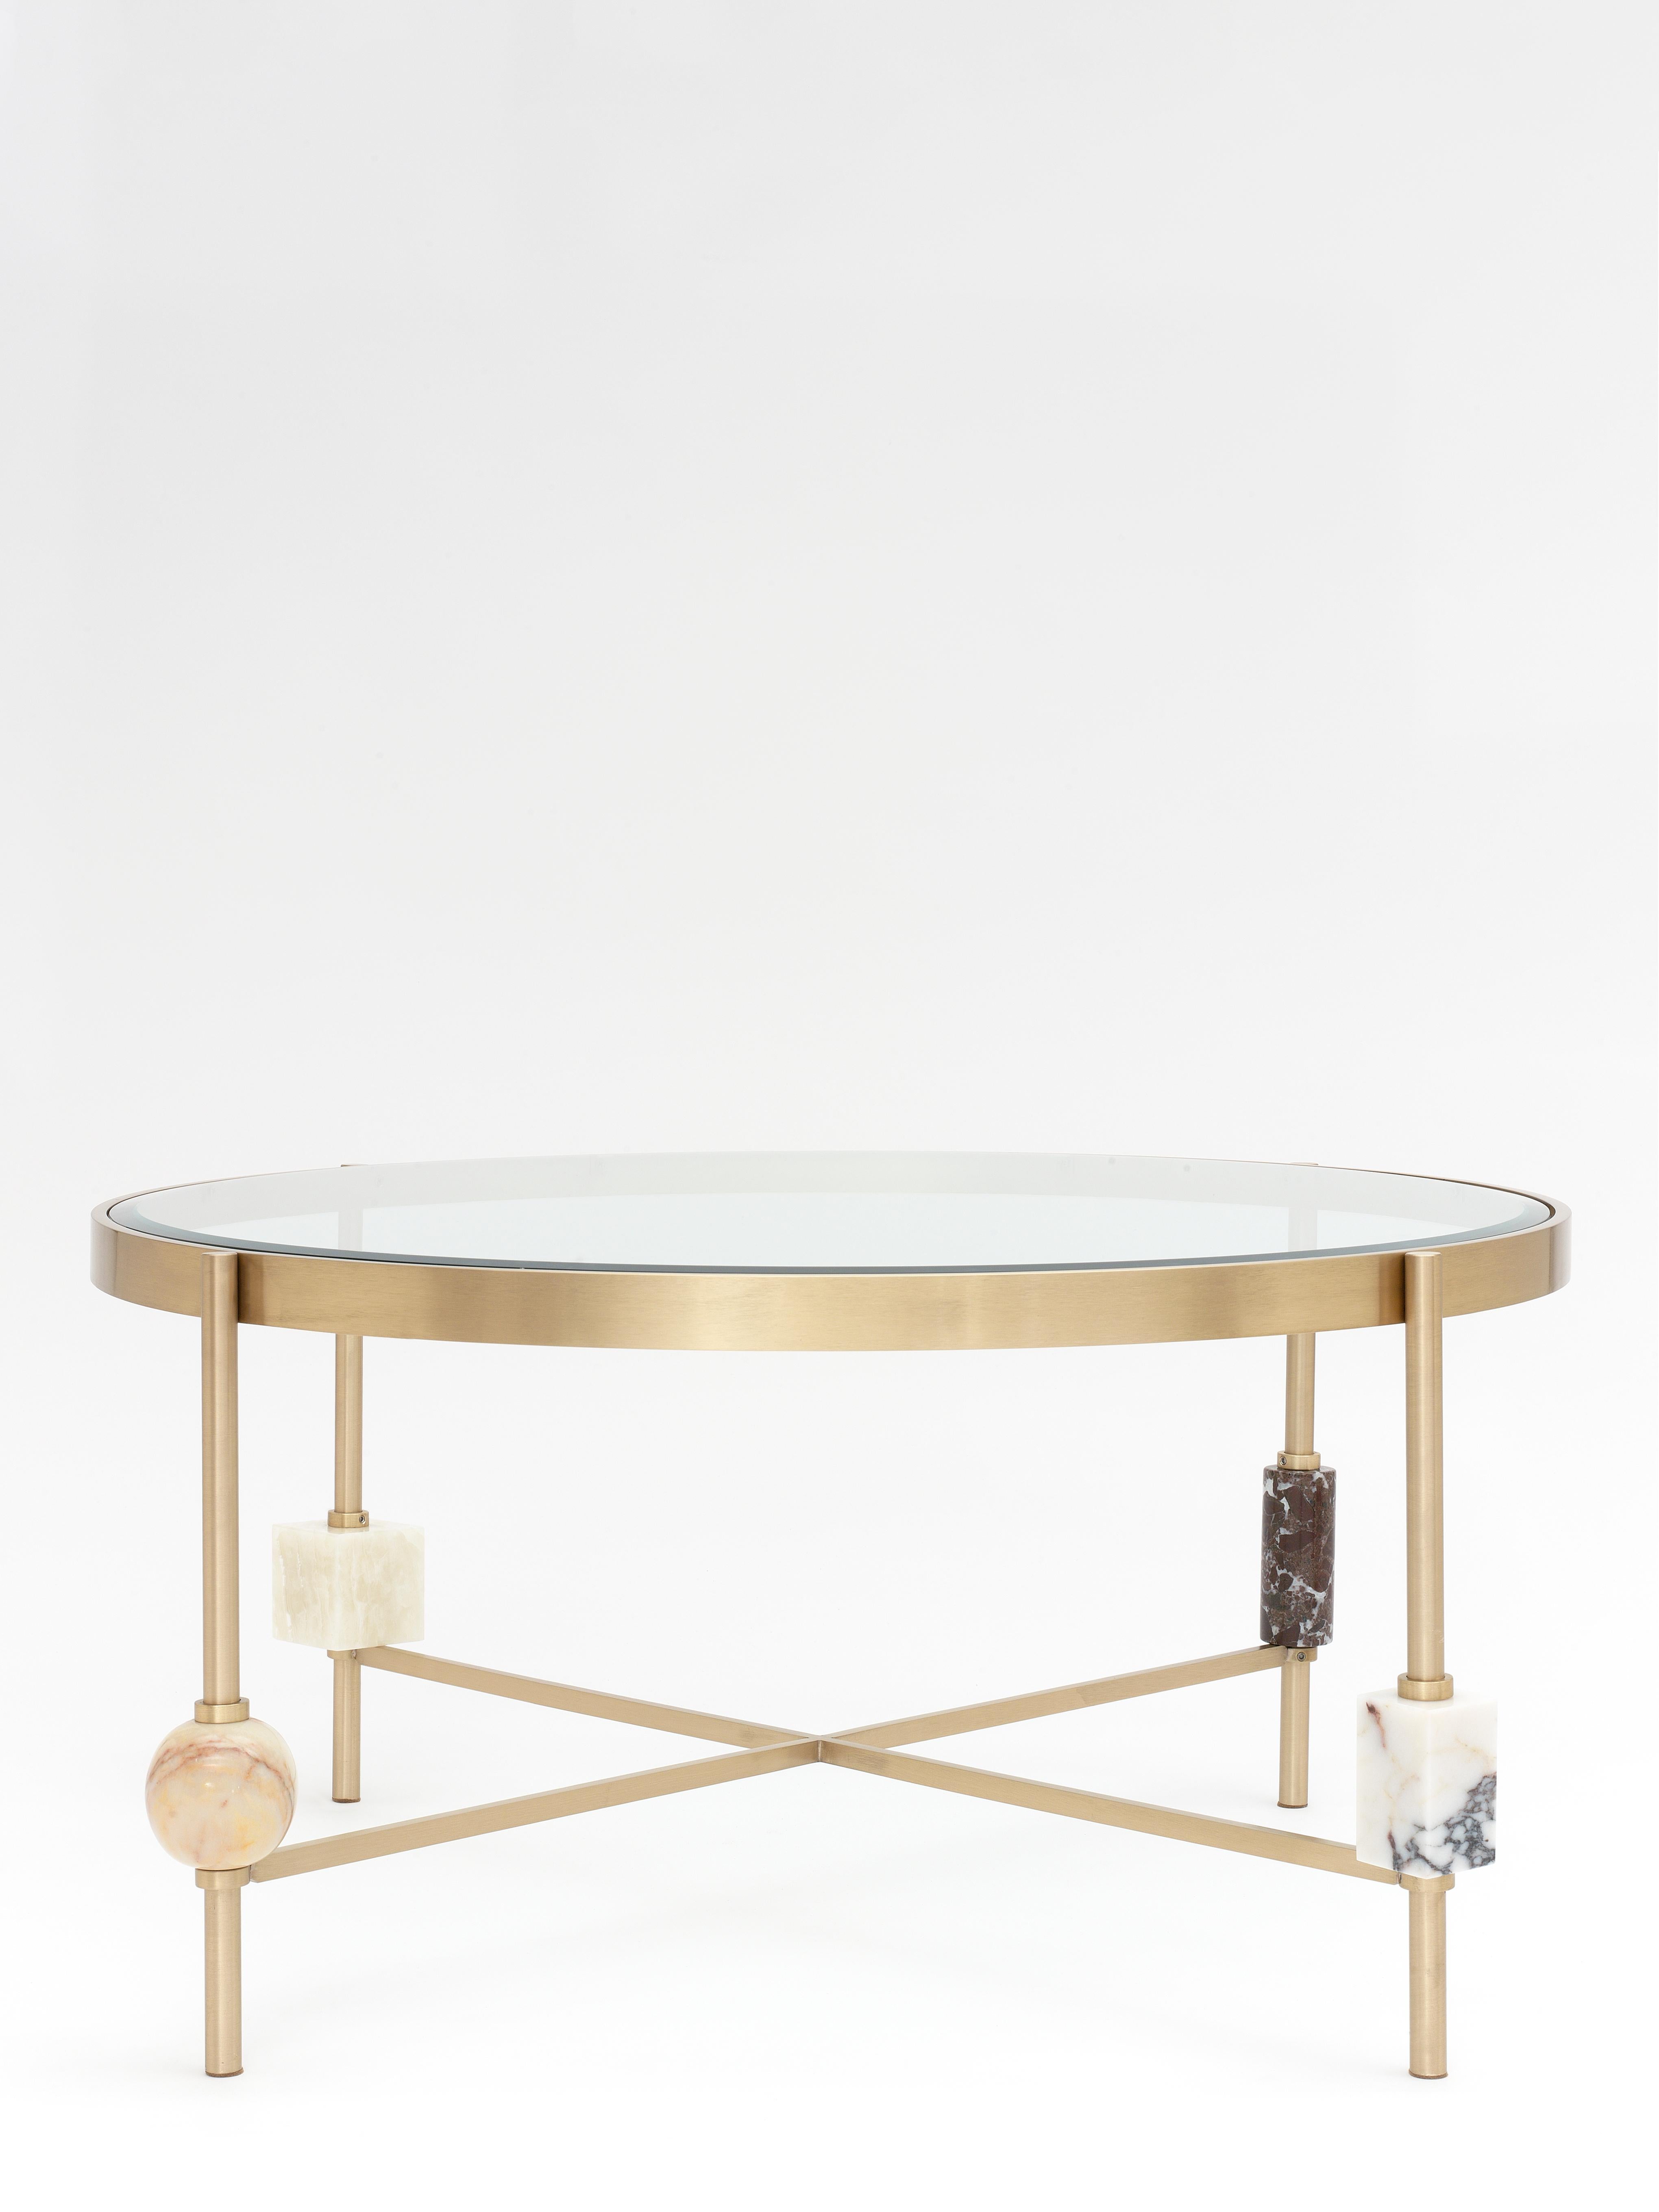 Plato coffee table by Yasemin Toygar
Handmade
Dimensions: W 90 x D 90 x H 45 cm
Materials: Brass, marble, onyx, glass.

Plato Collection

Inspired by the geometric still life, Plato explores and defies the boundaries of sensory experience of